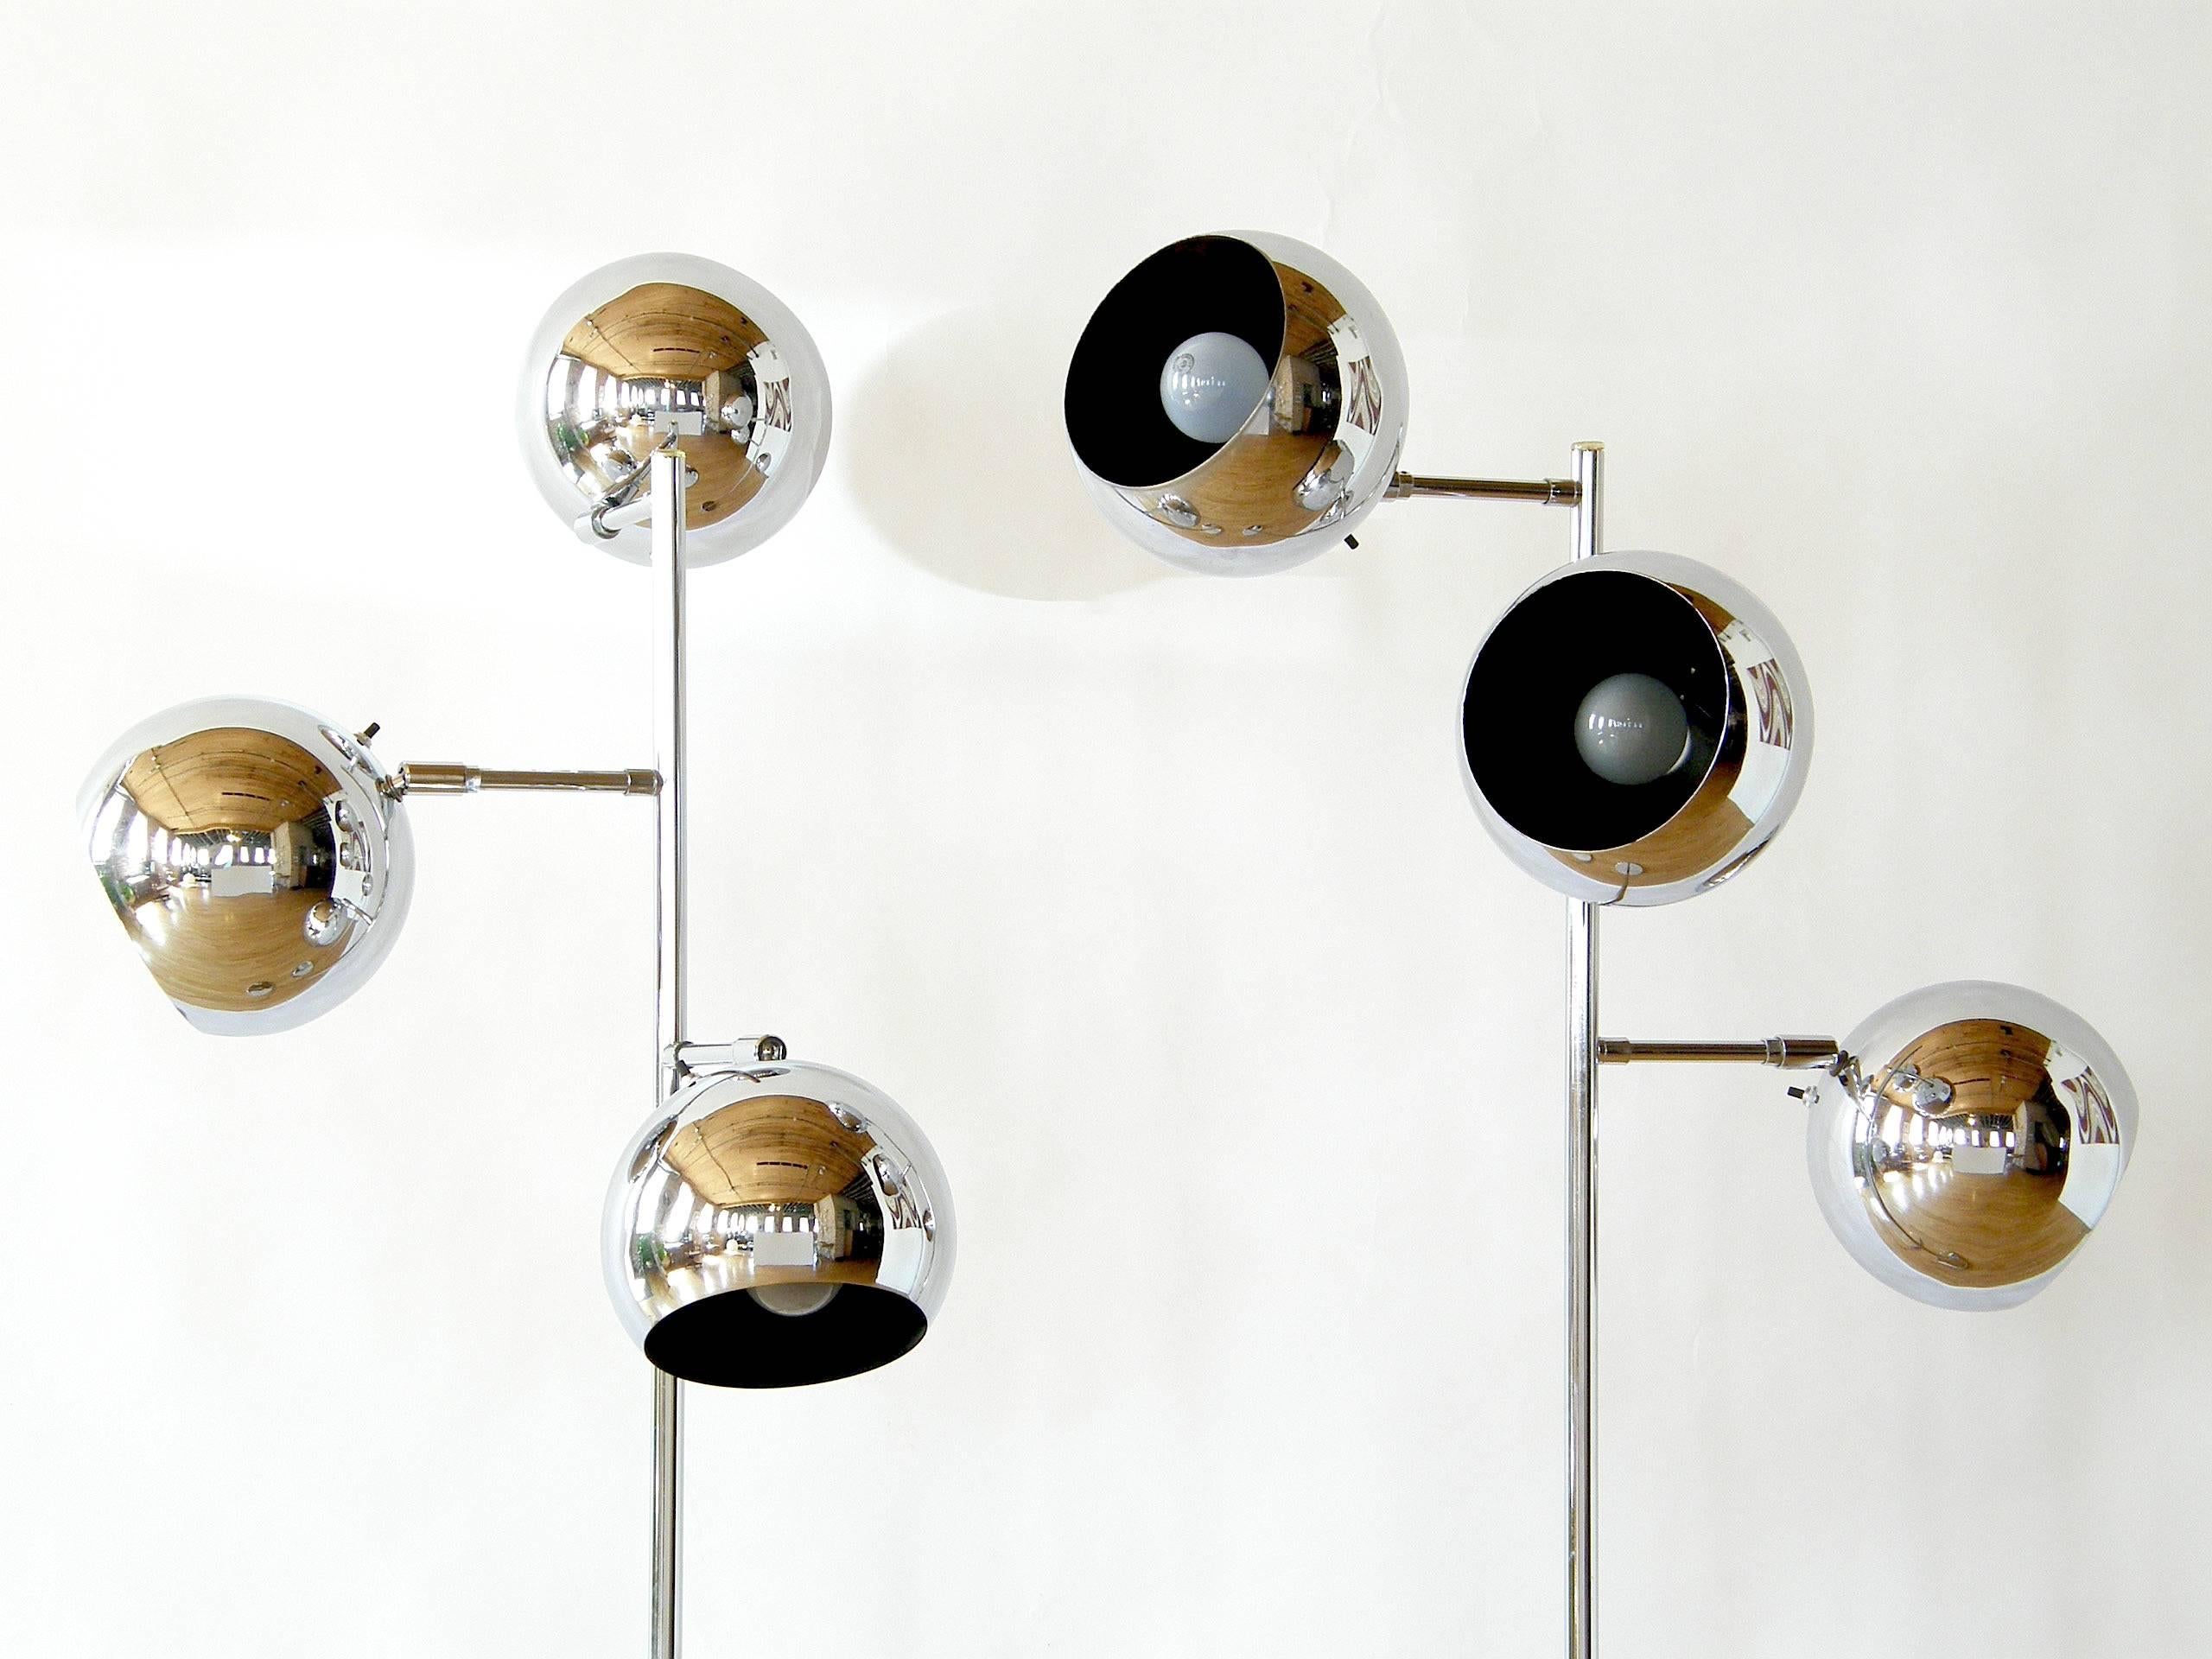 This pair of Koch & Lowy chrome floor lamps each have three tilting and pivoting eyeball shades set on slender stems. The shade diameters are 7.5